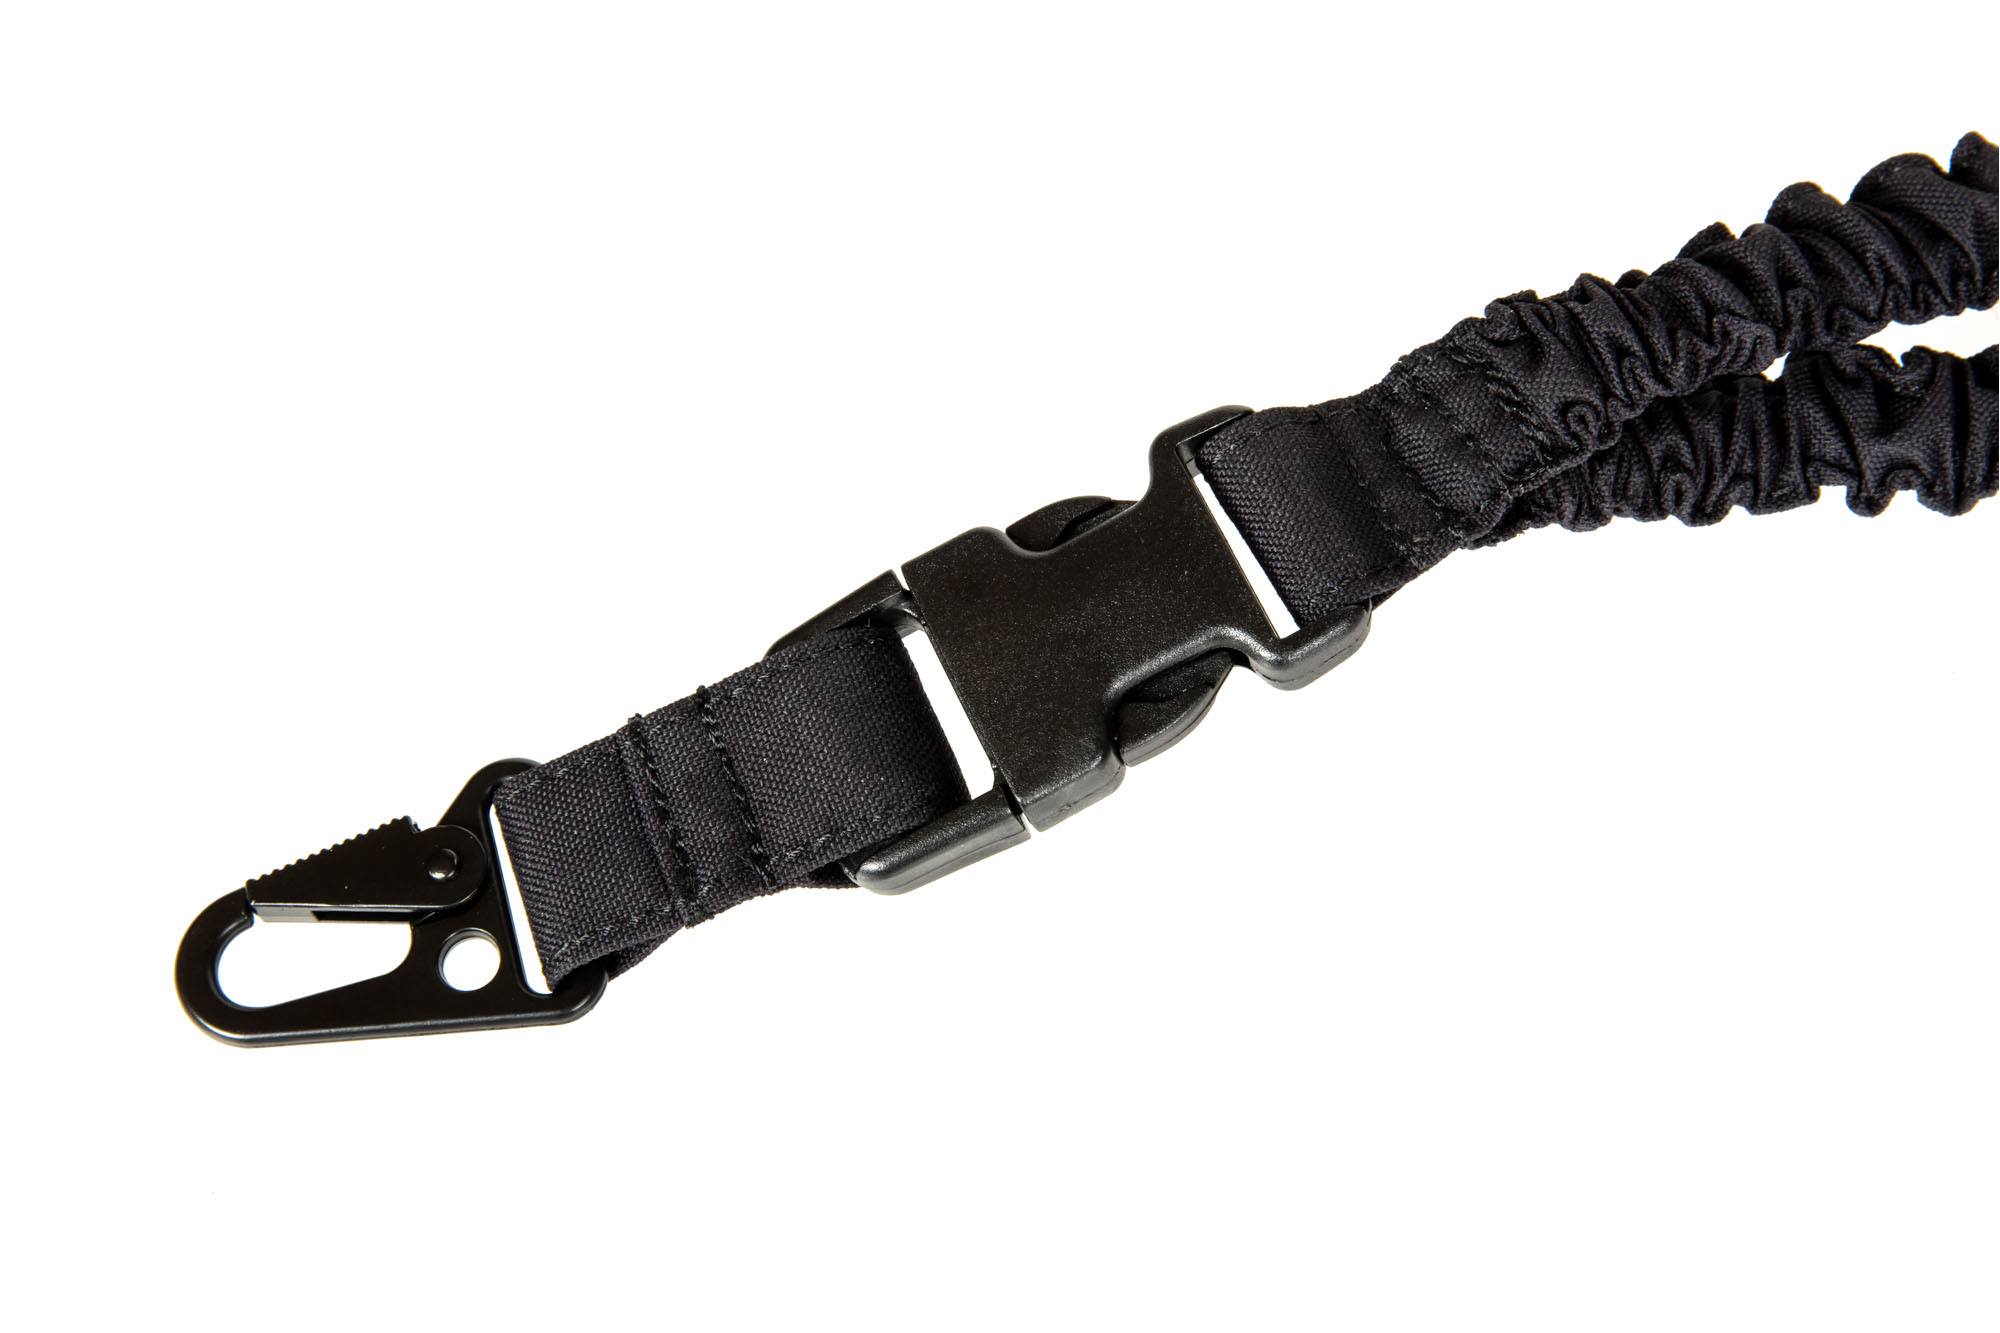 1-point bungee sling Stylia - Black